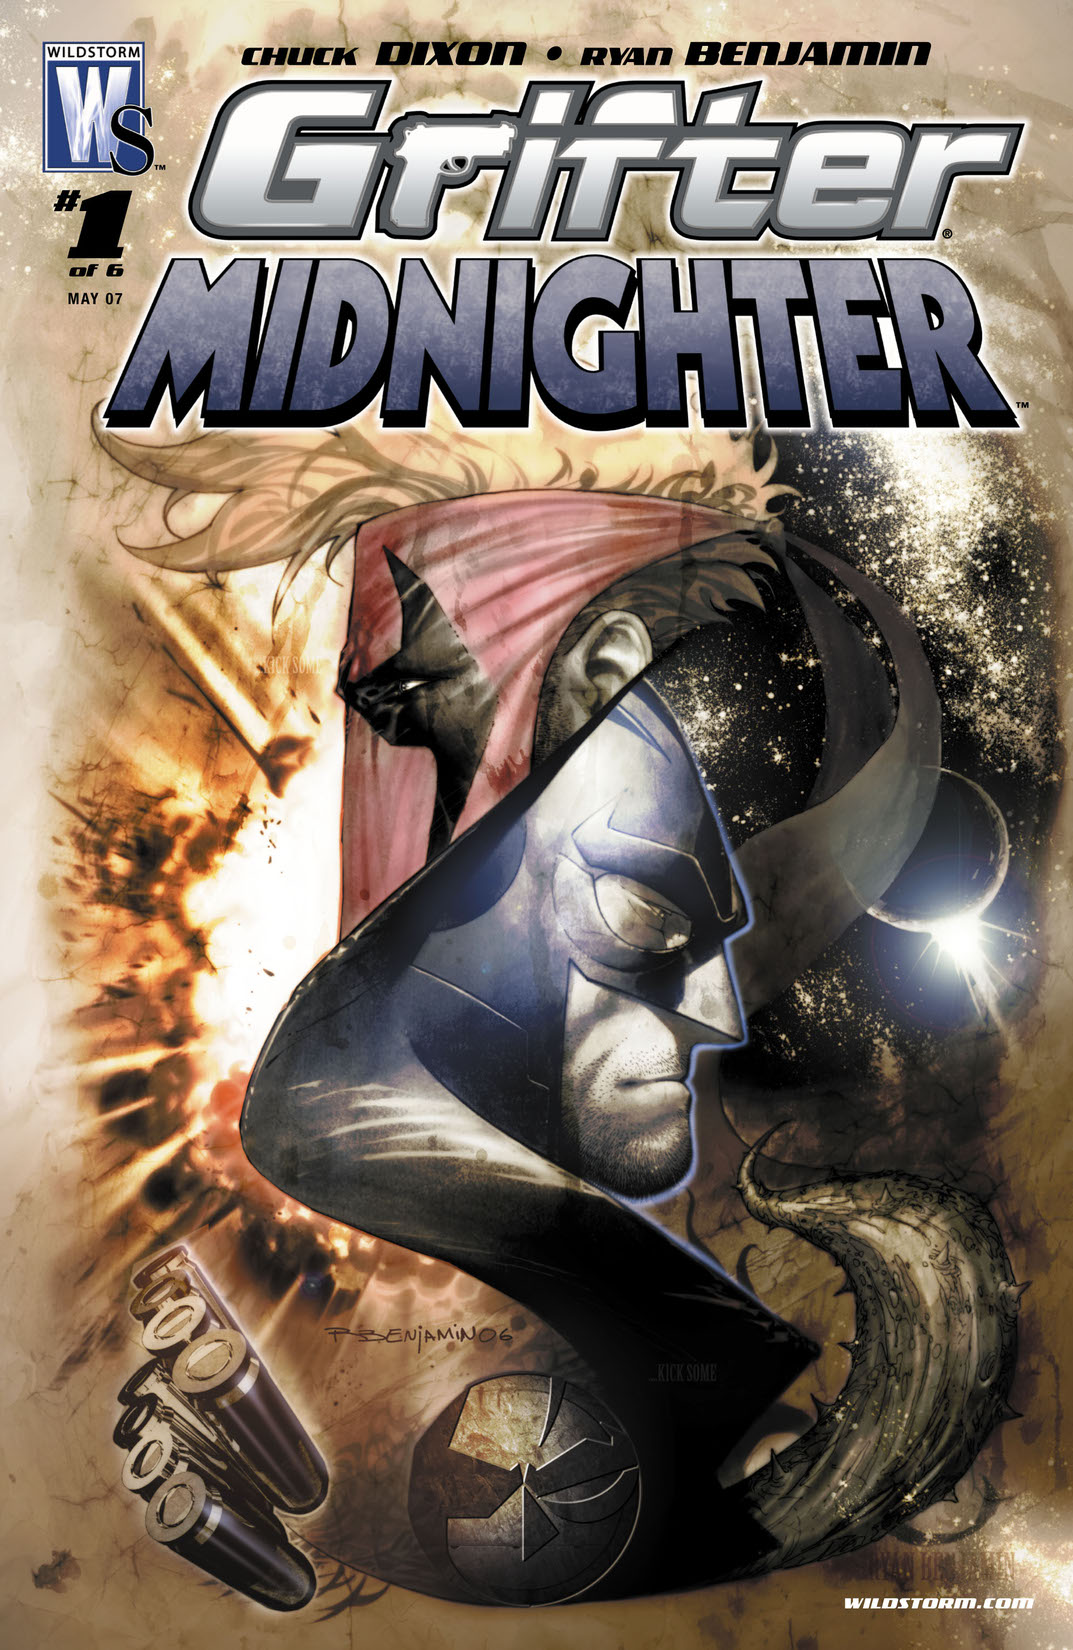 Grifter & Midnighter #1 preview images